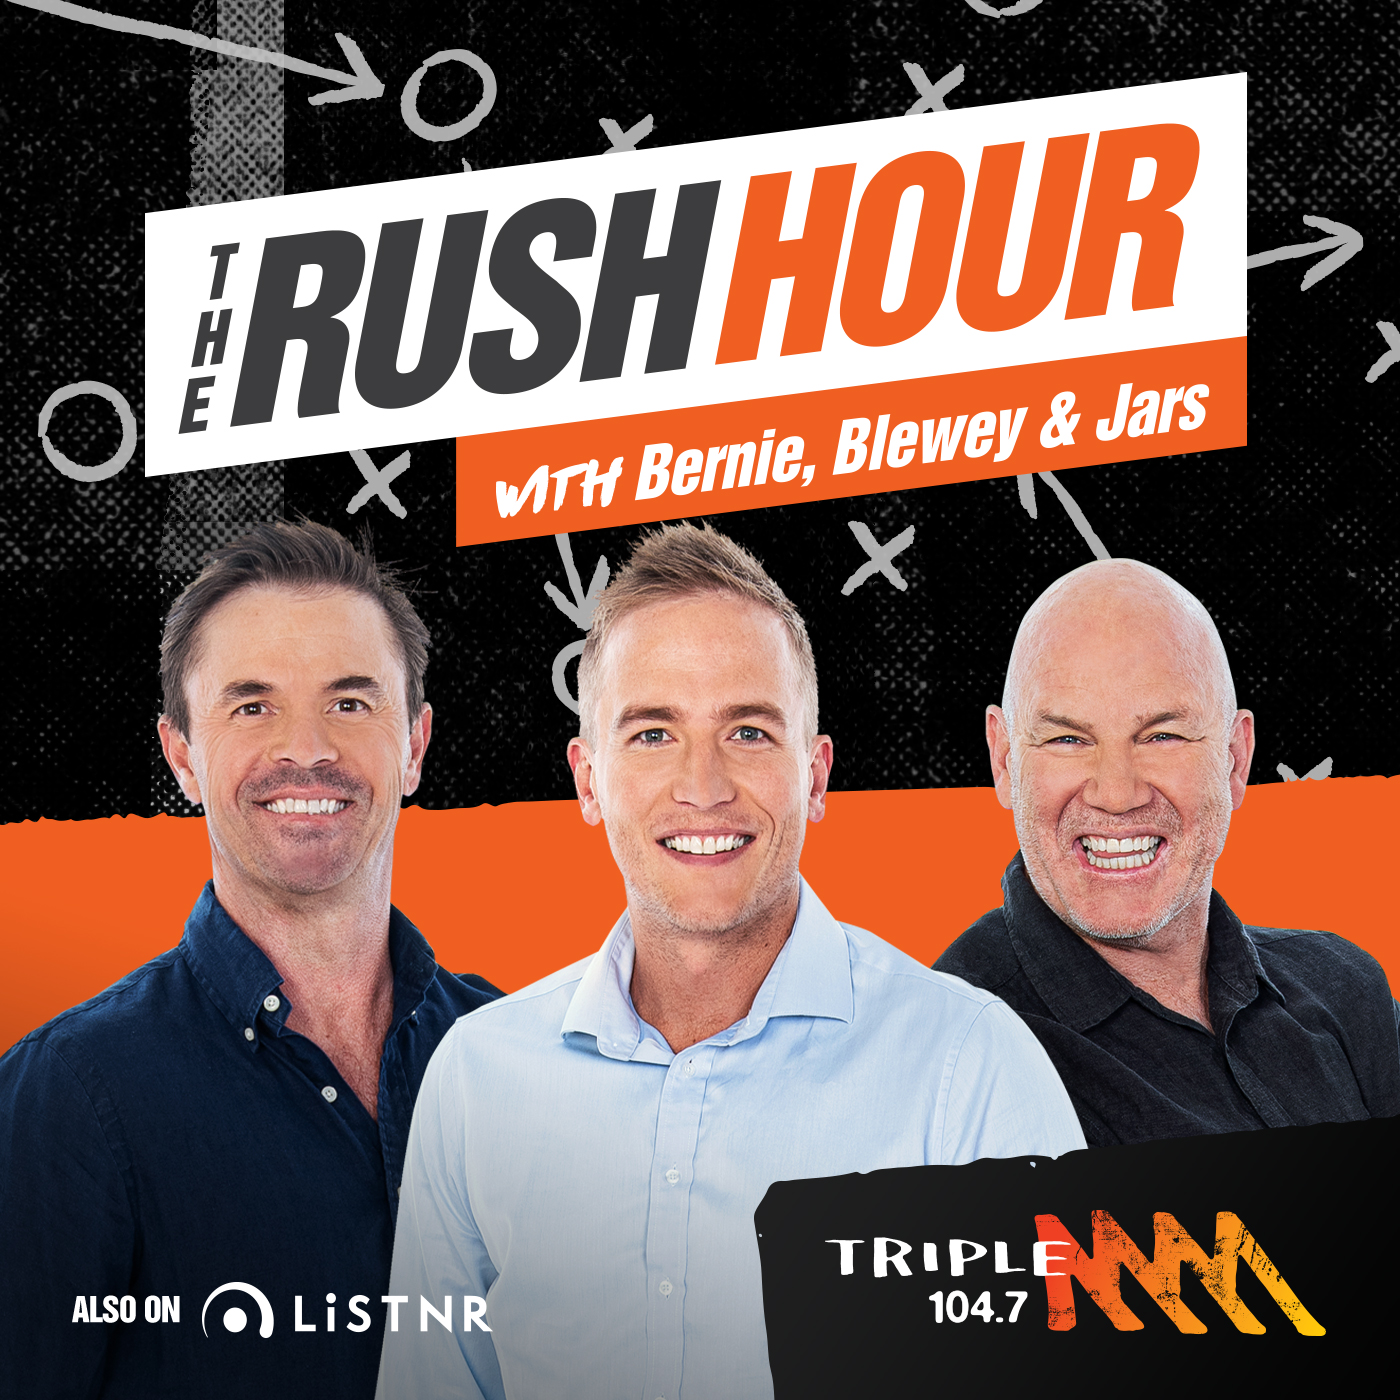 FULL SHOW - David King on new AFL magazine ‘Footy 21’ and for or against the standing the mark rule, Pre Season Showdowns chat & Beer with Blewey. - The Rush Hour with Bernie, Blewey & Jars.